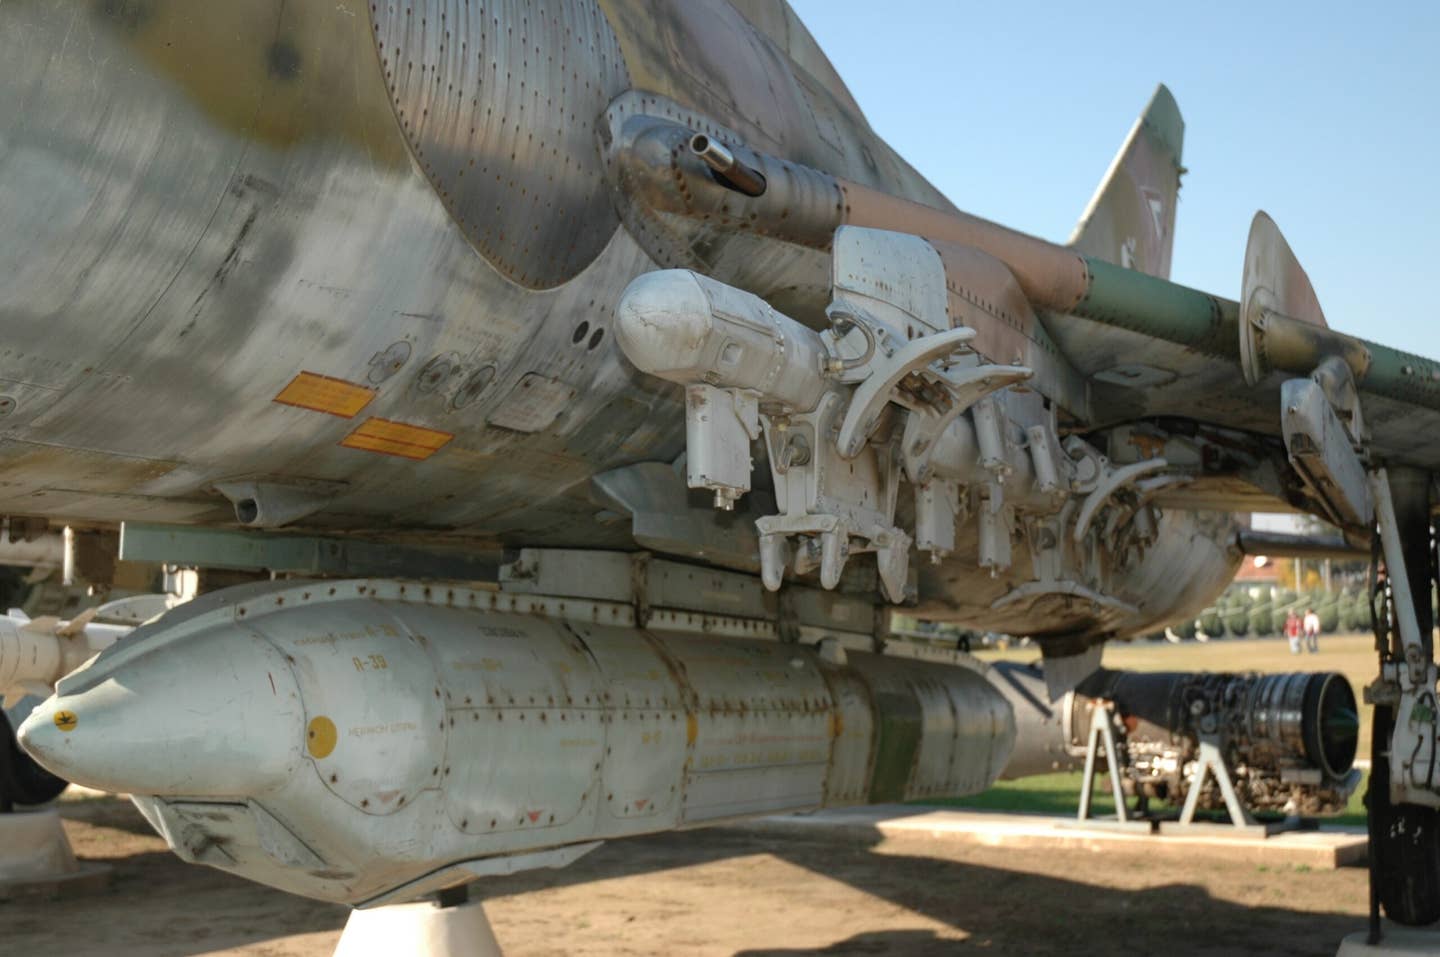 A KKR-1T reconnaissance pod mounted on a Hungarian Su-22 preserved in a museum. <em>VargaA/Wikimedia Commons</em>